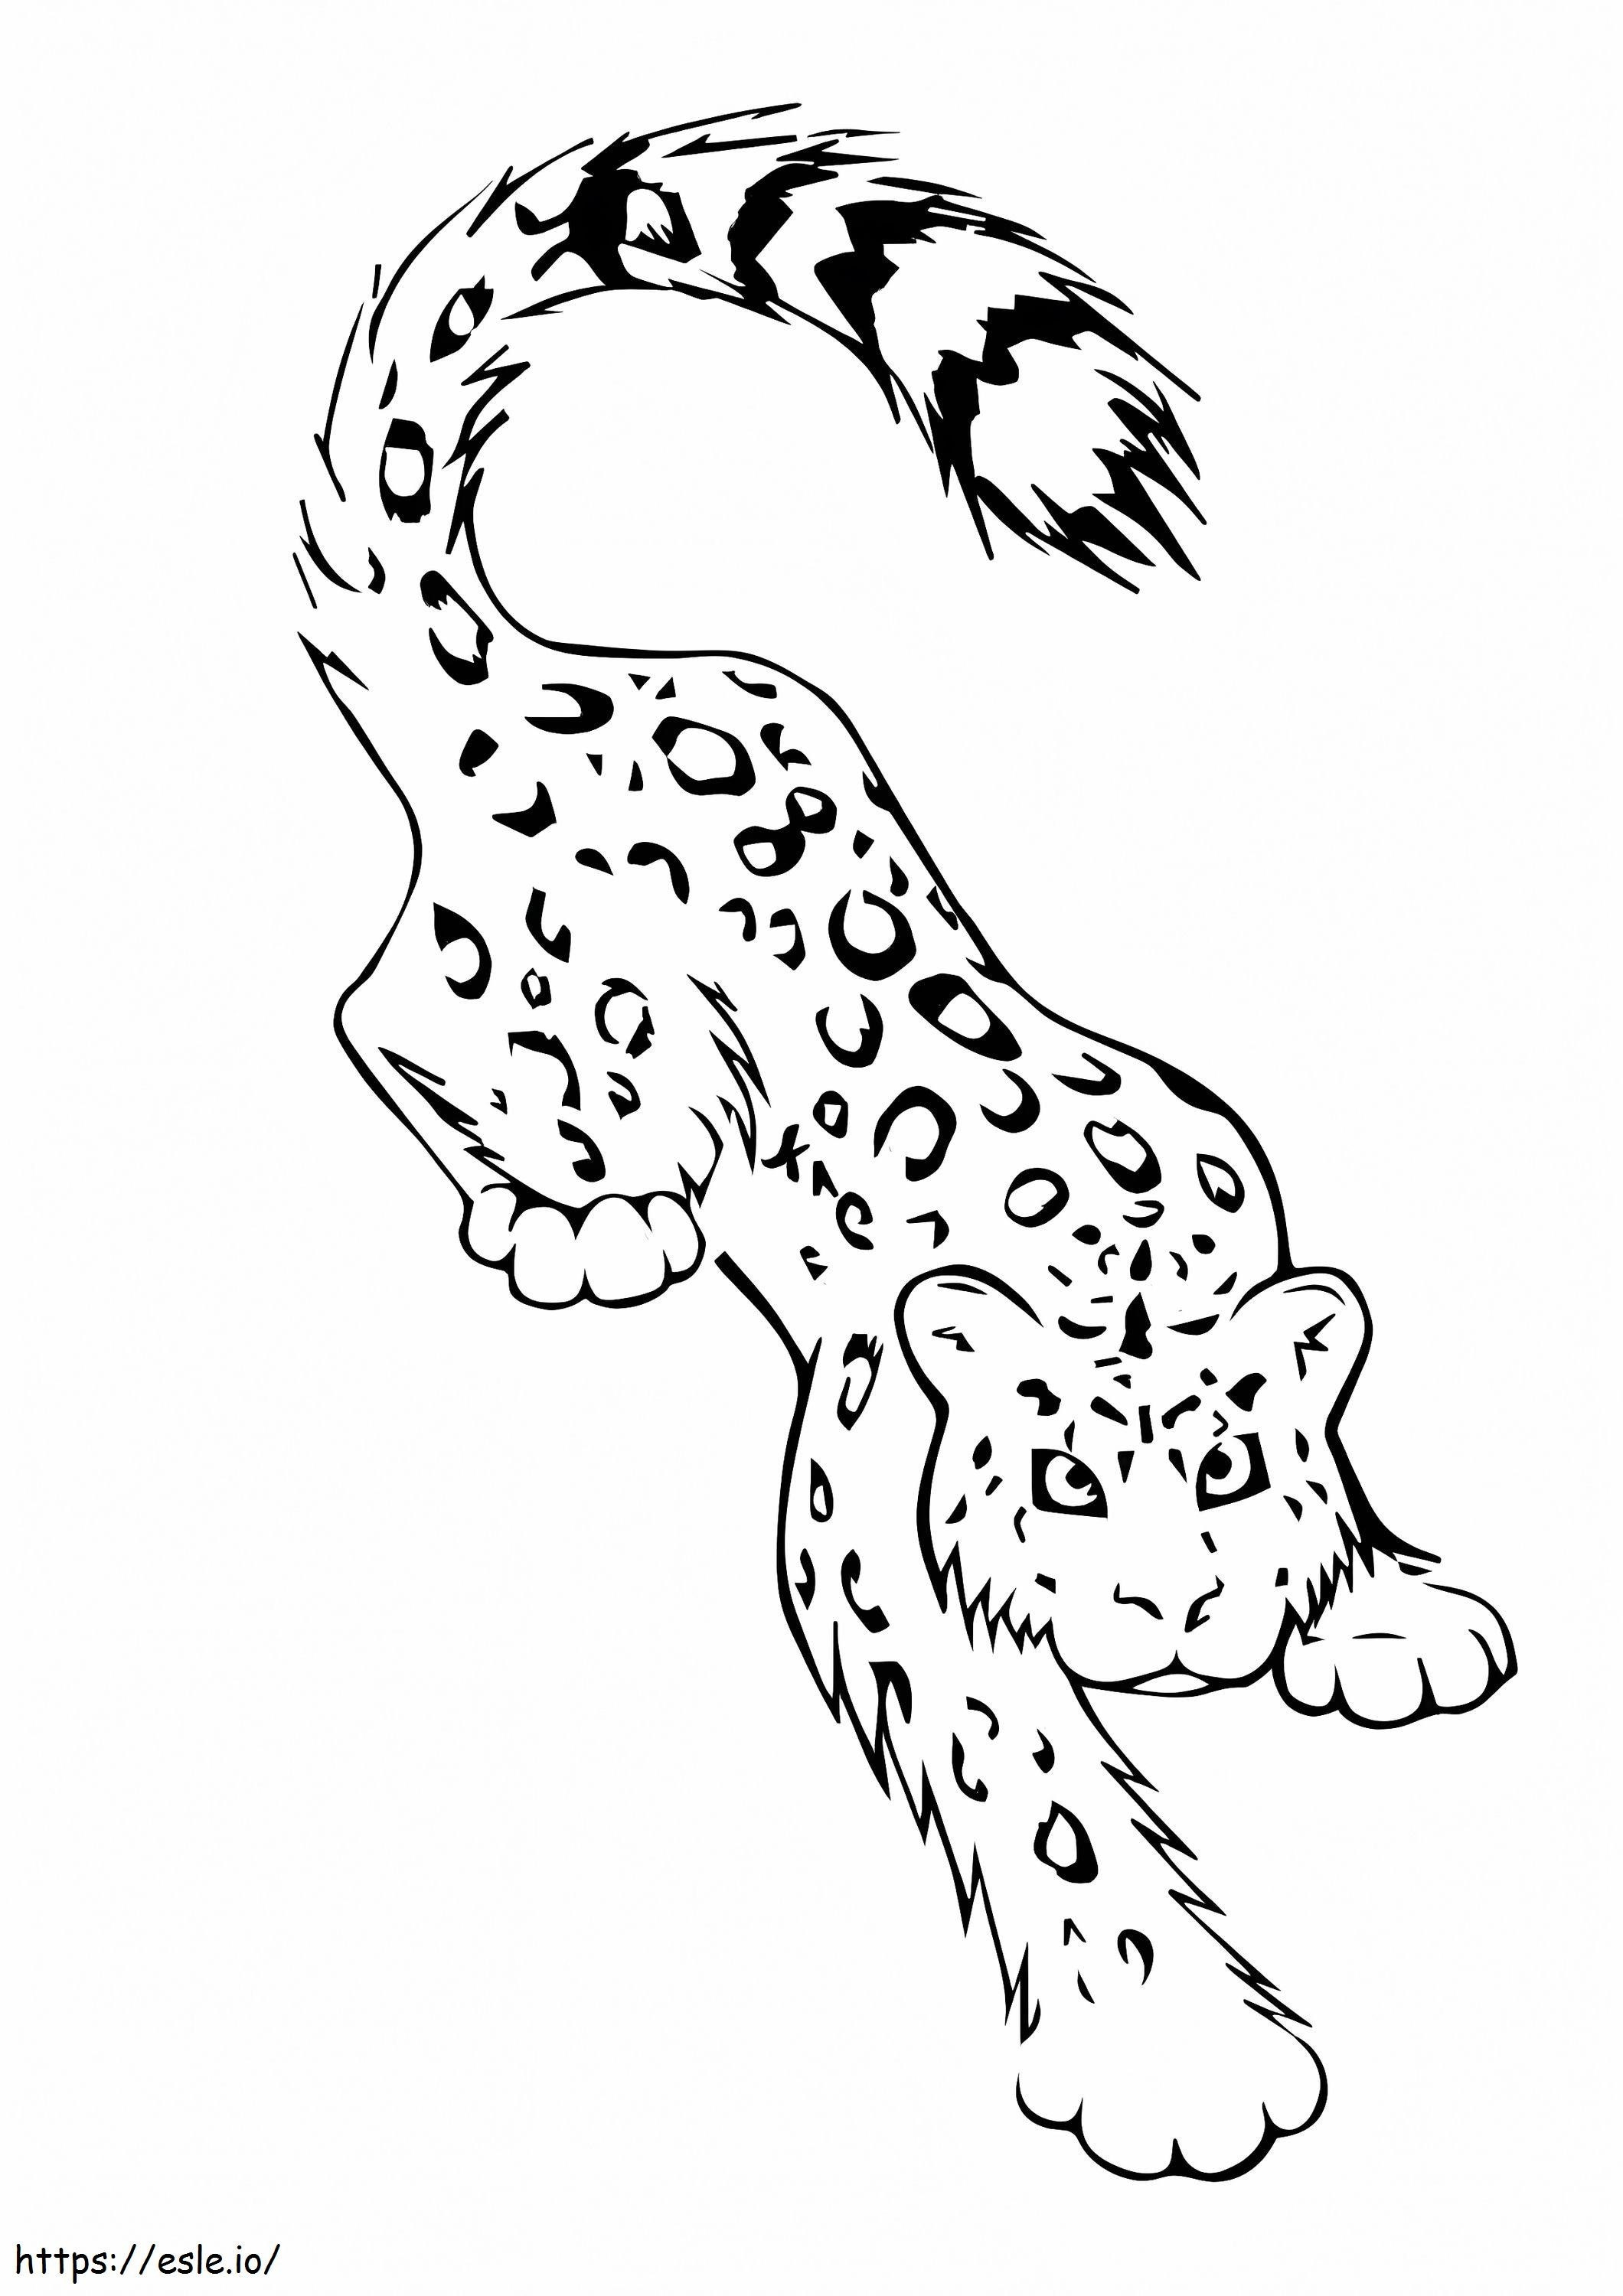 Snow Leopard 1 coloring page